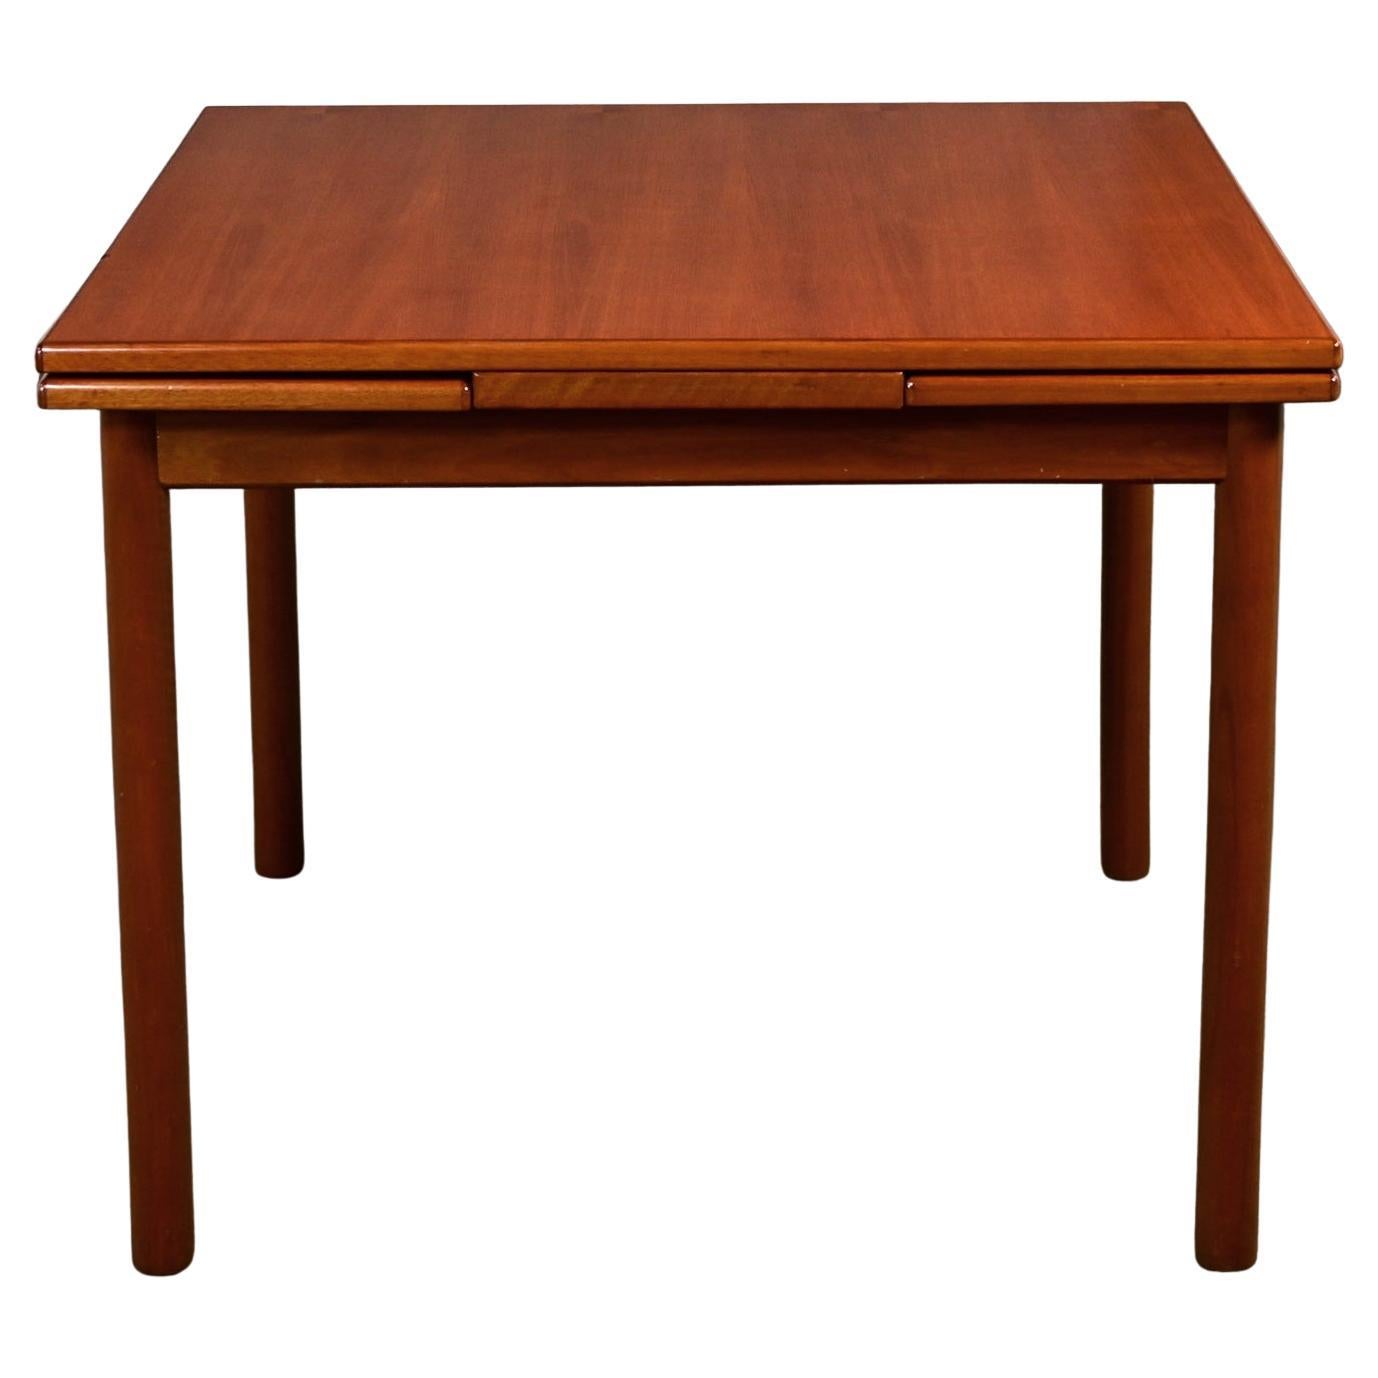 Scandinavian Modern Style Teak Square Extension Dining Table Made in Singapore